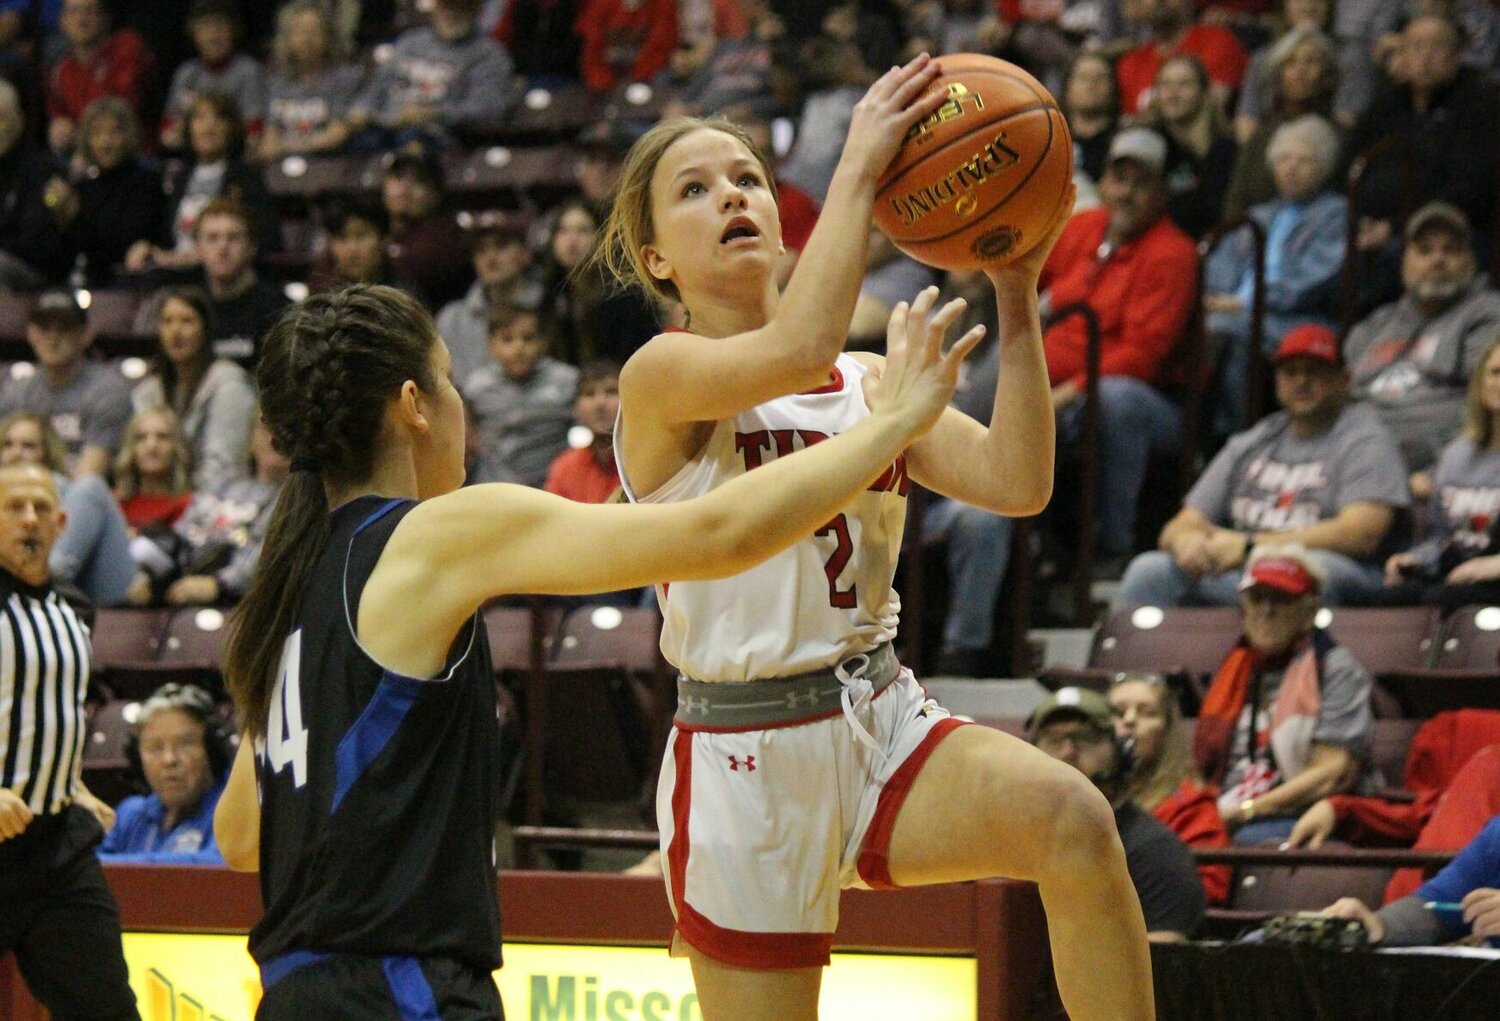 Lady Cardinals freshman Kya Smith attempts a layup in the second half against Norwood in Friday's Final Four contest.